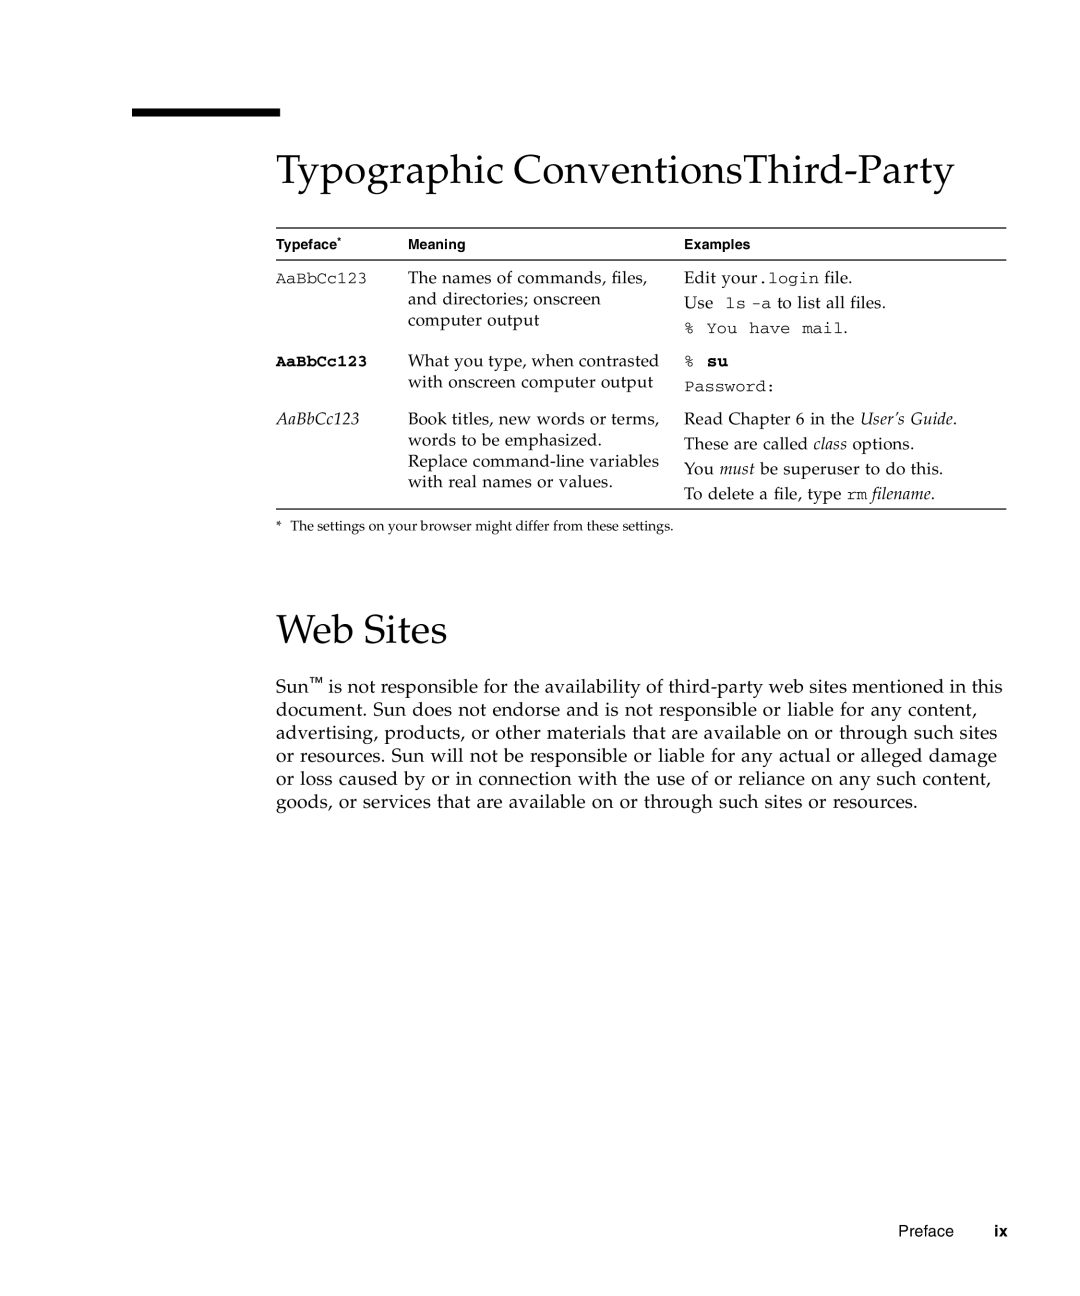 Sun Microsystems X4240, X4440, X4140 manual Typographic ConventionsThird-Party, Web Sites 